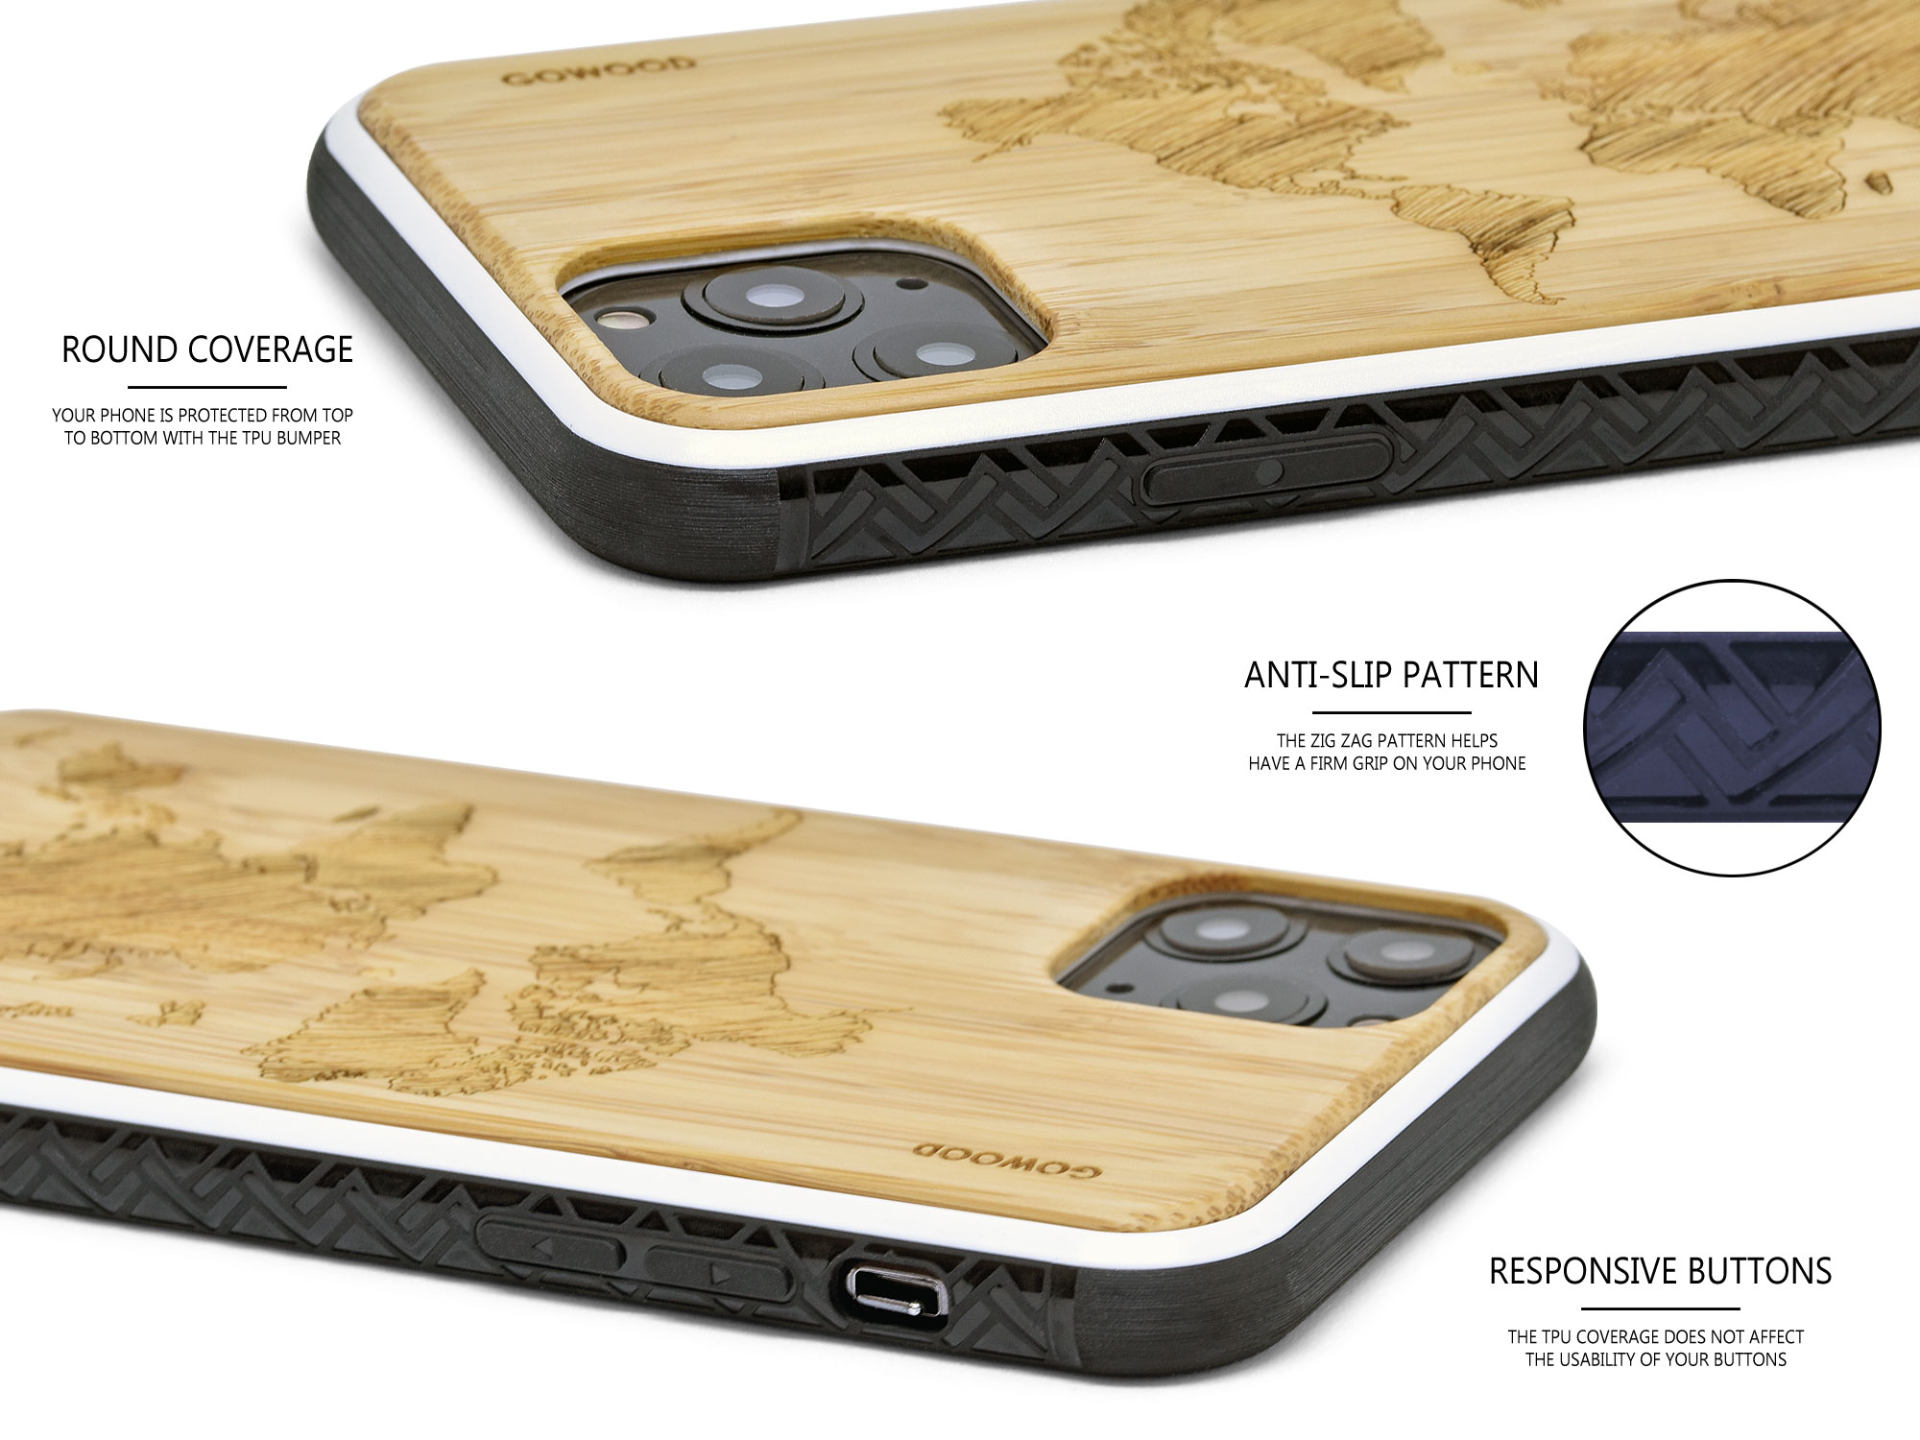 iPhone 11 Pro wood case world map engraved bamboo backside with TPU bumper